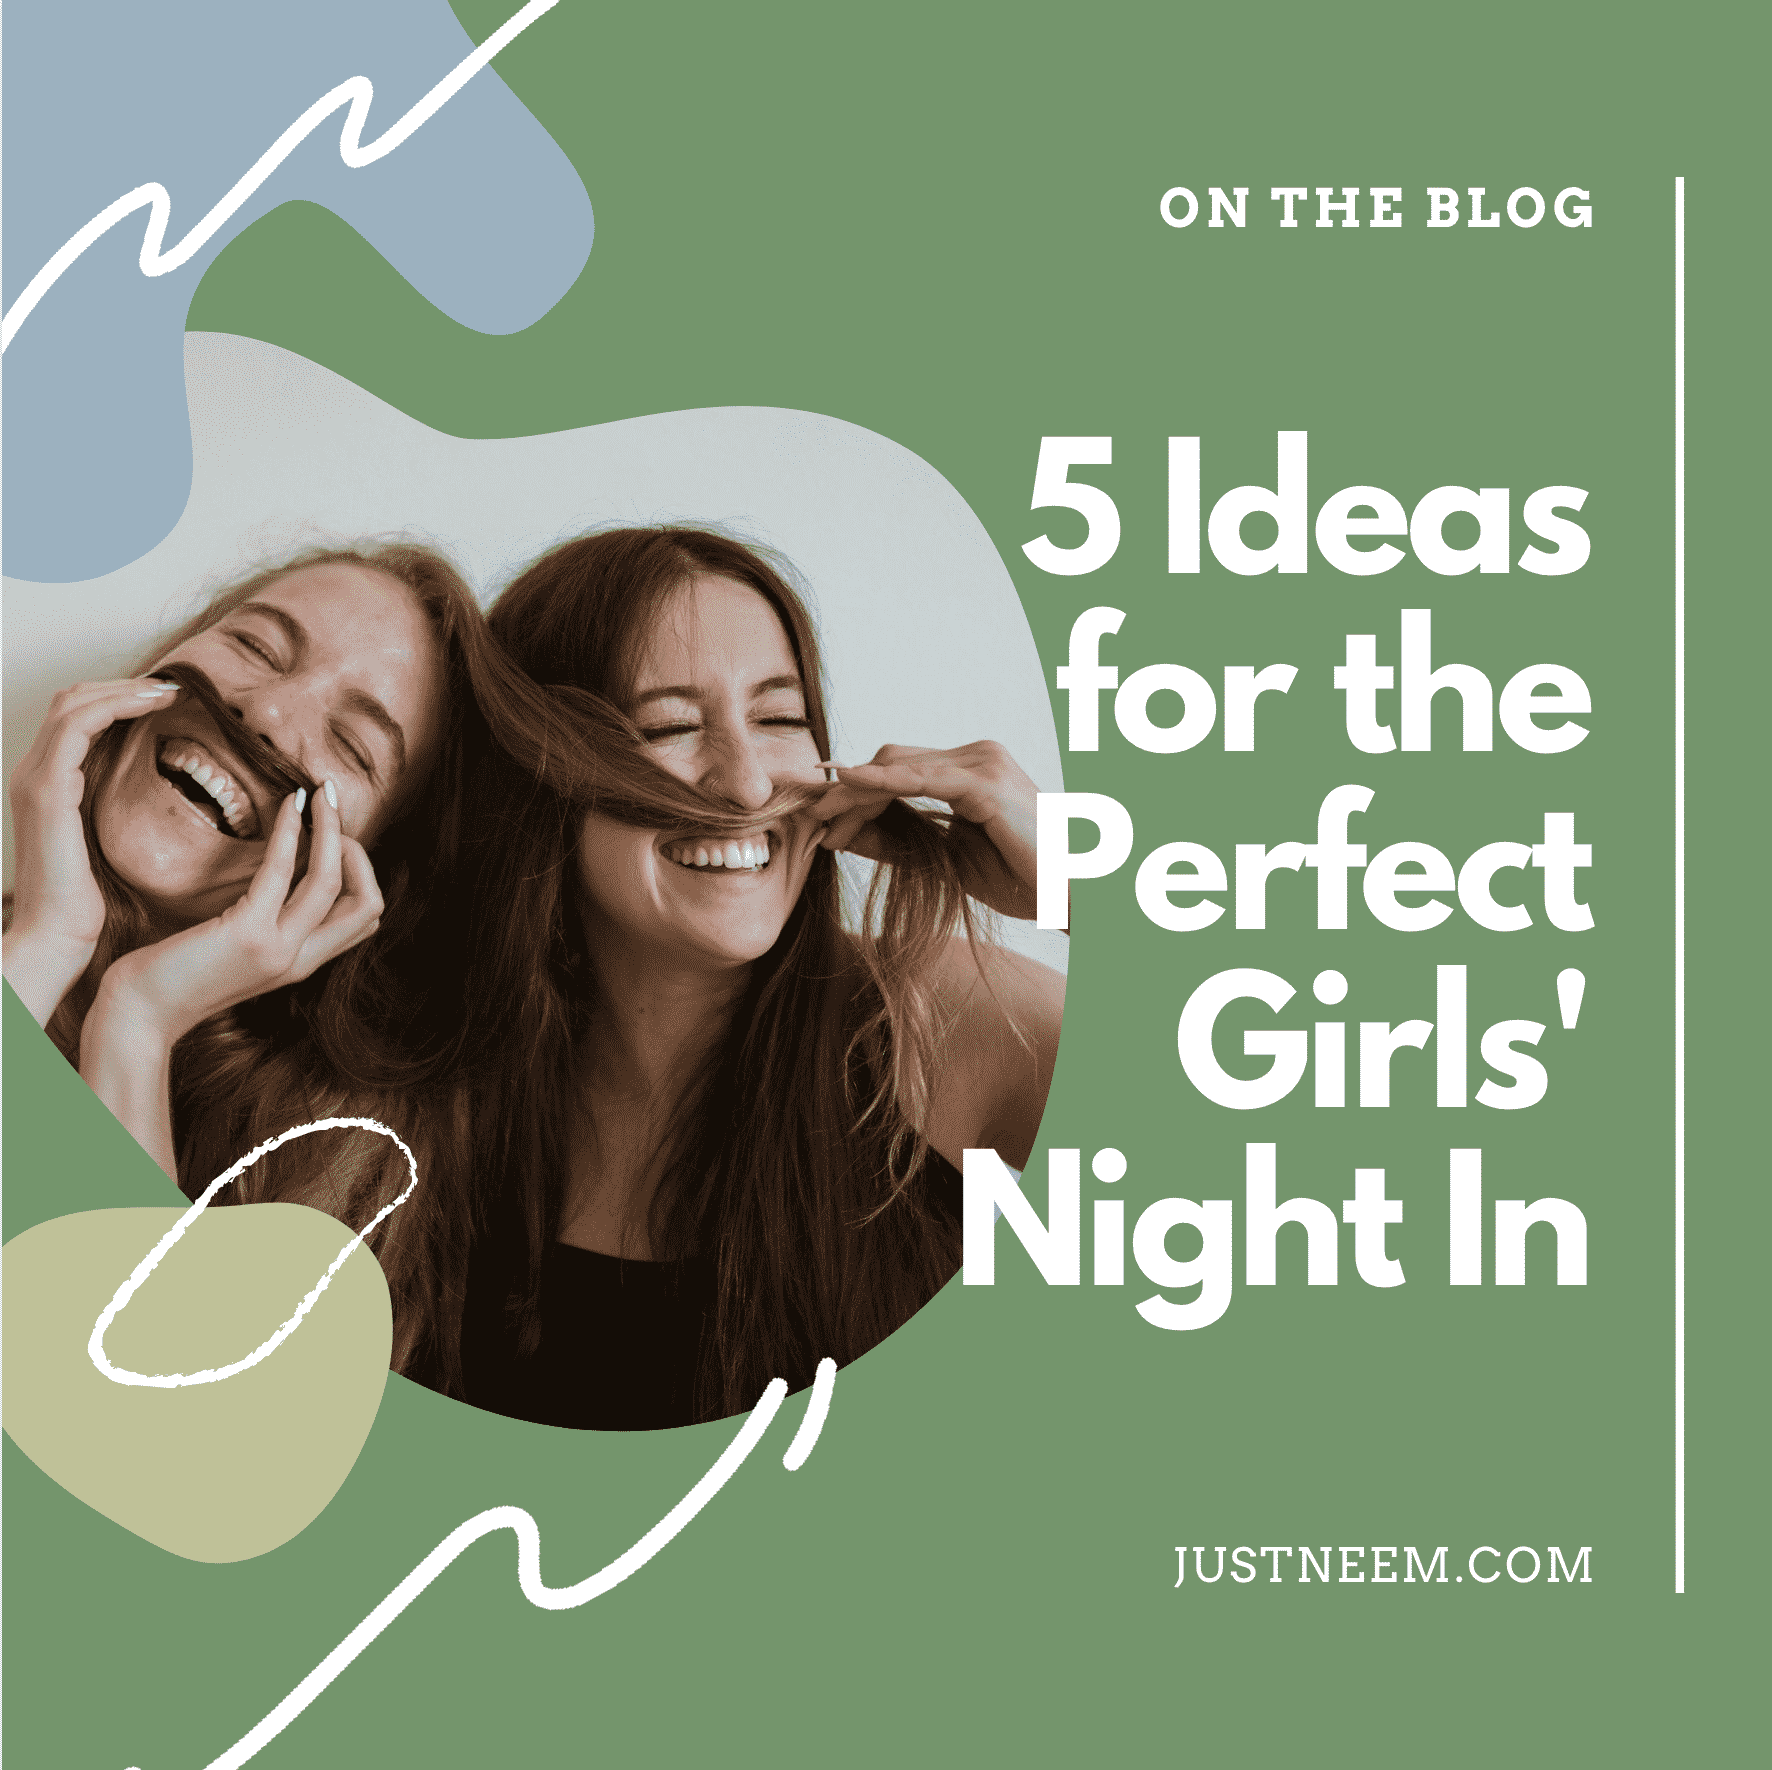 5 Ideas for the Perfect Girls’ Night In